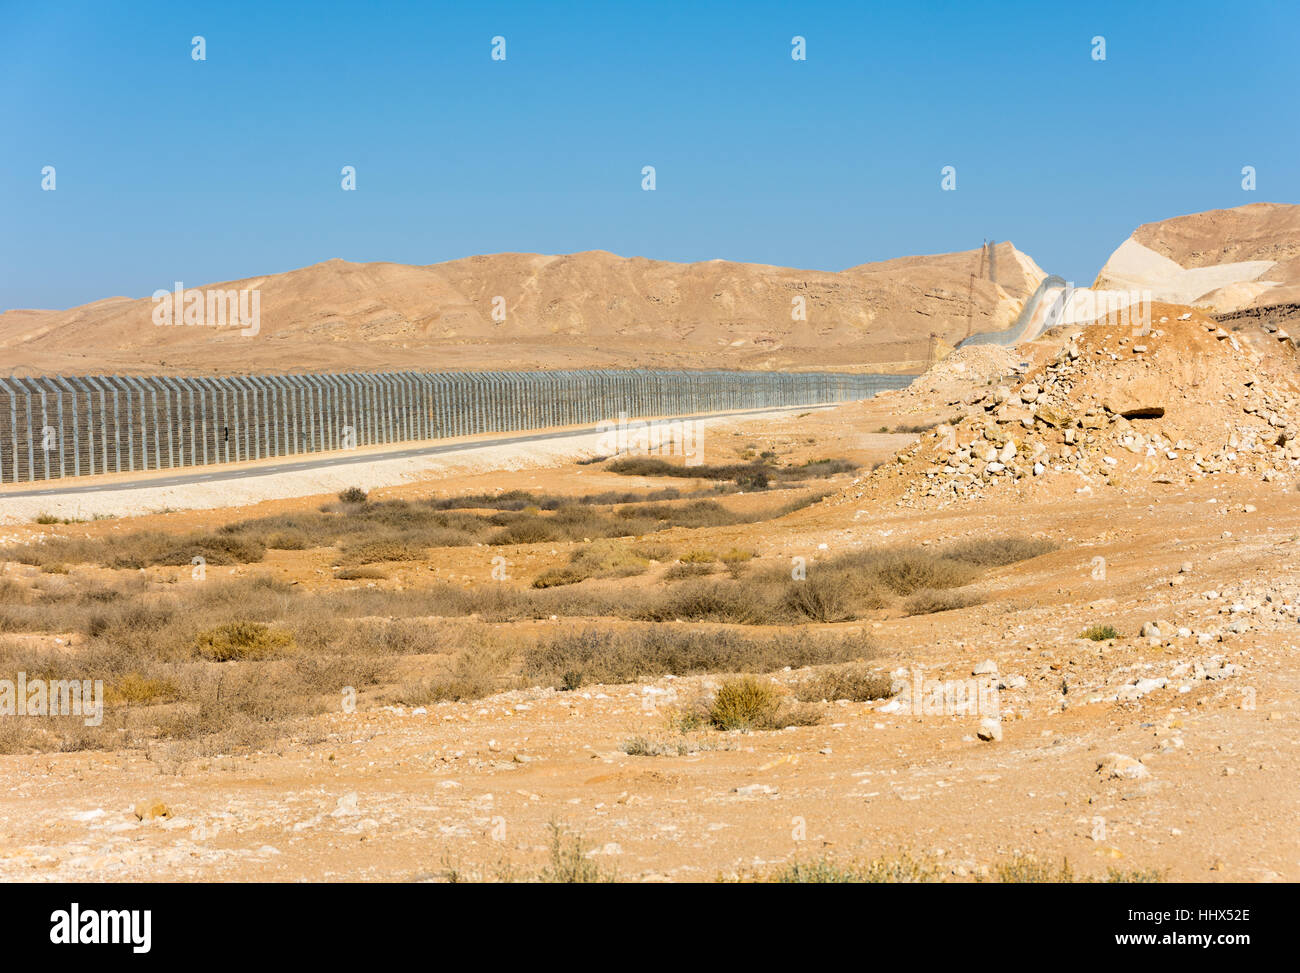 The new border fence between Israel (Negev Desert) and Egypt (Sinai Desert) with the patrol road protecting the border Stock Photo